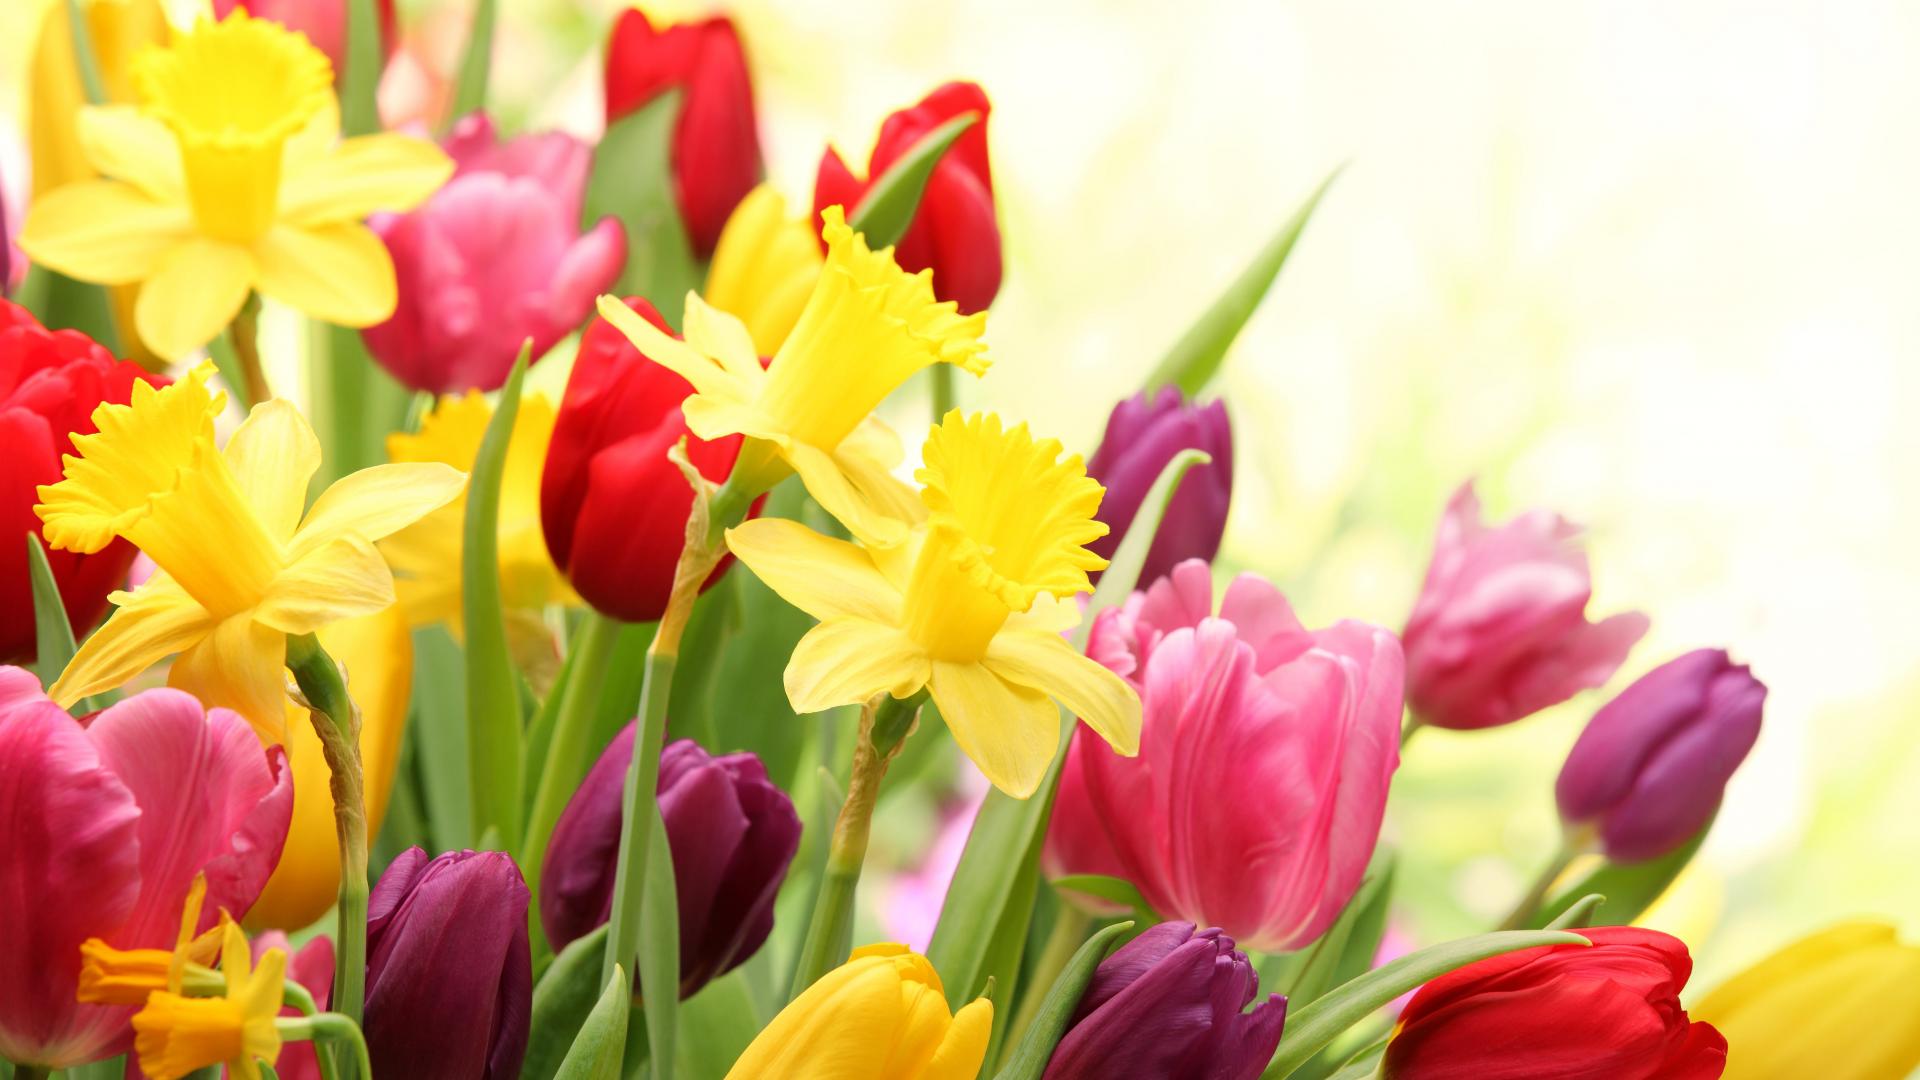 Colorful Spring Flowers wallpaperx1080